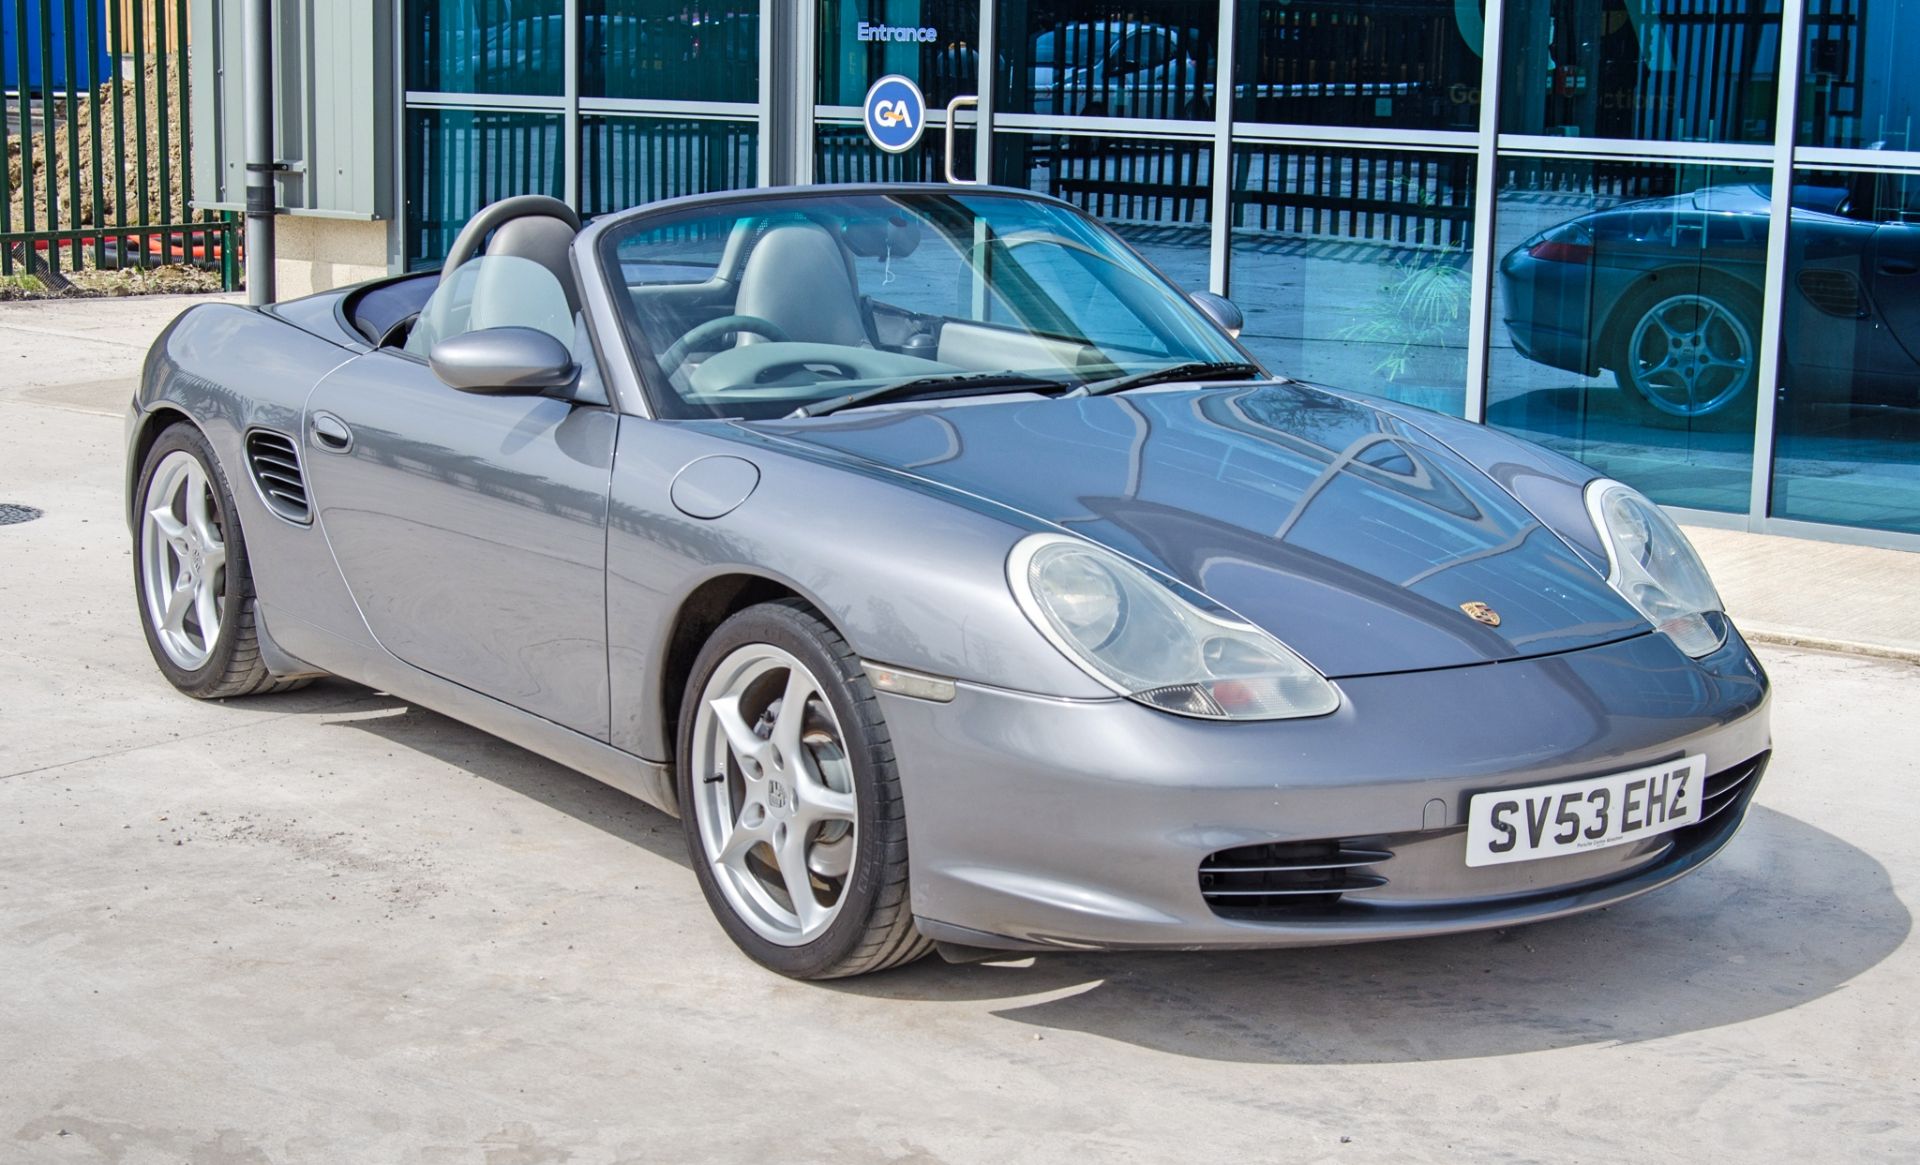 2003 Porsche Boxster 2.7 5 speed manual convertible roadster - Image 2 of 50